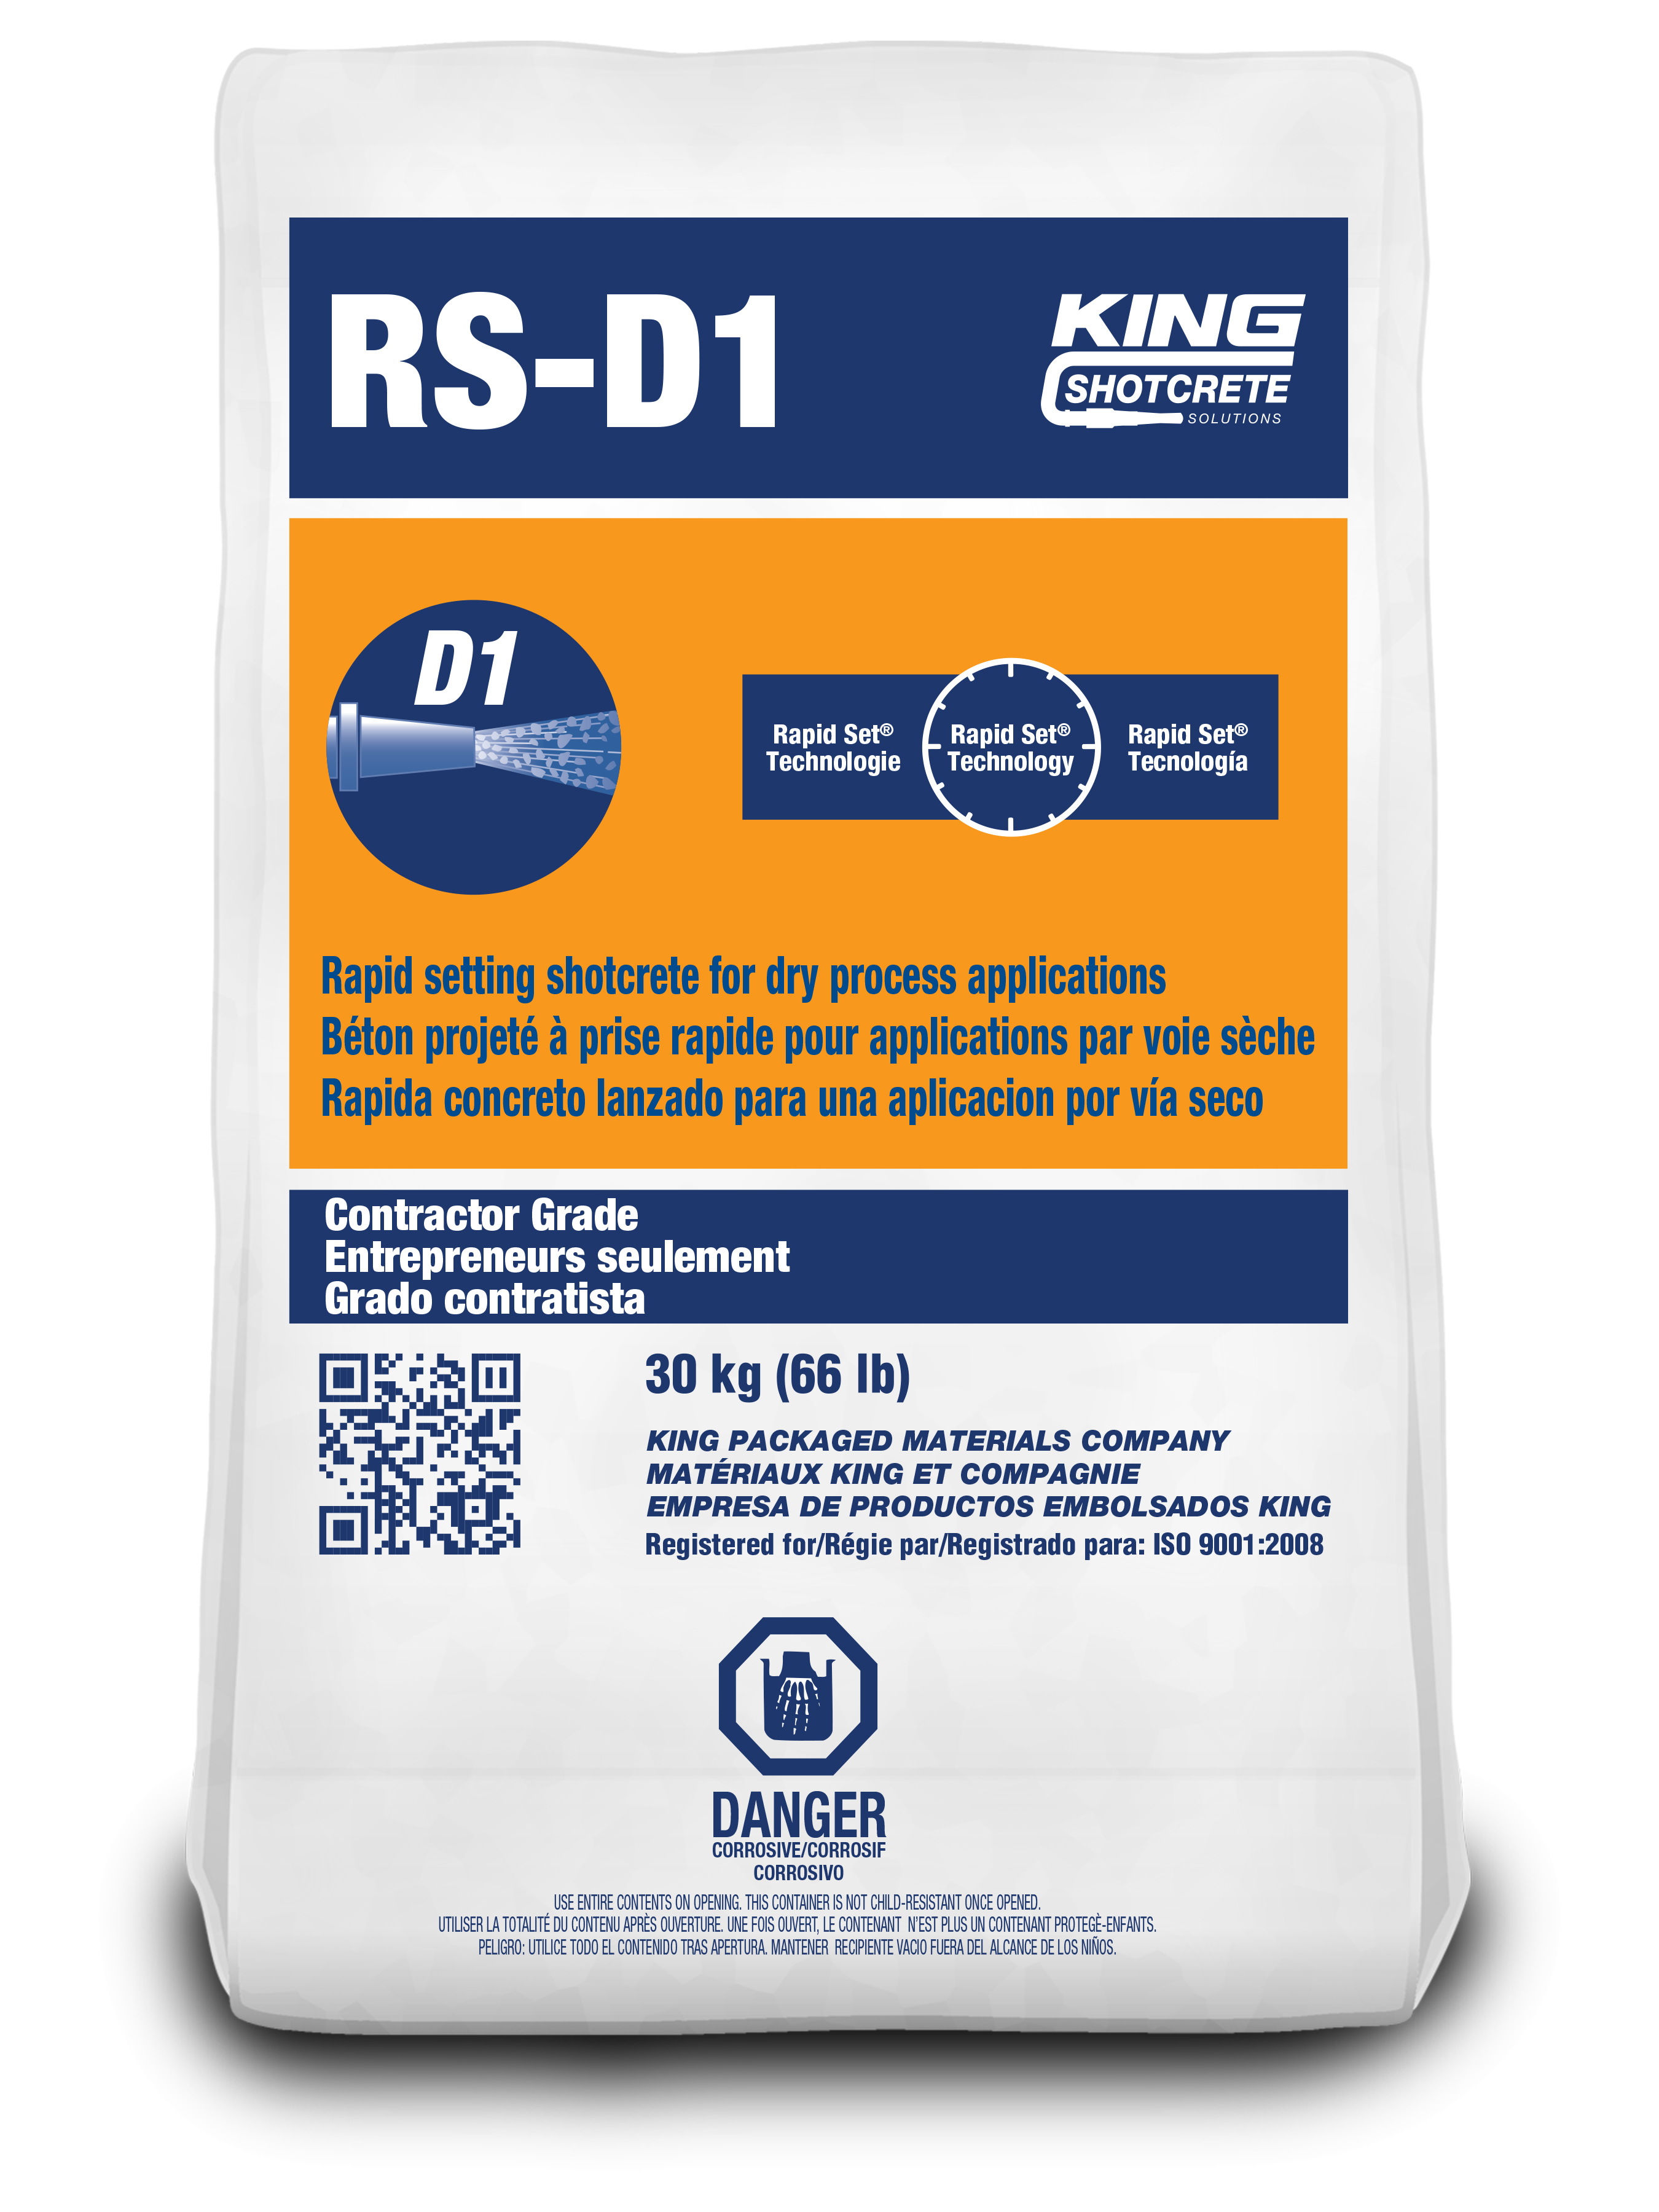 RS-D1 Shotcrete Added to Transport Quebec “Accepted Product List”